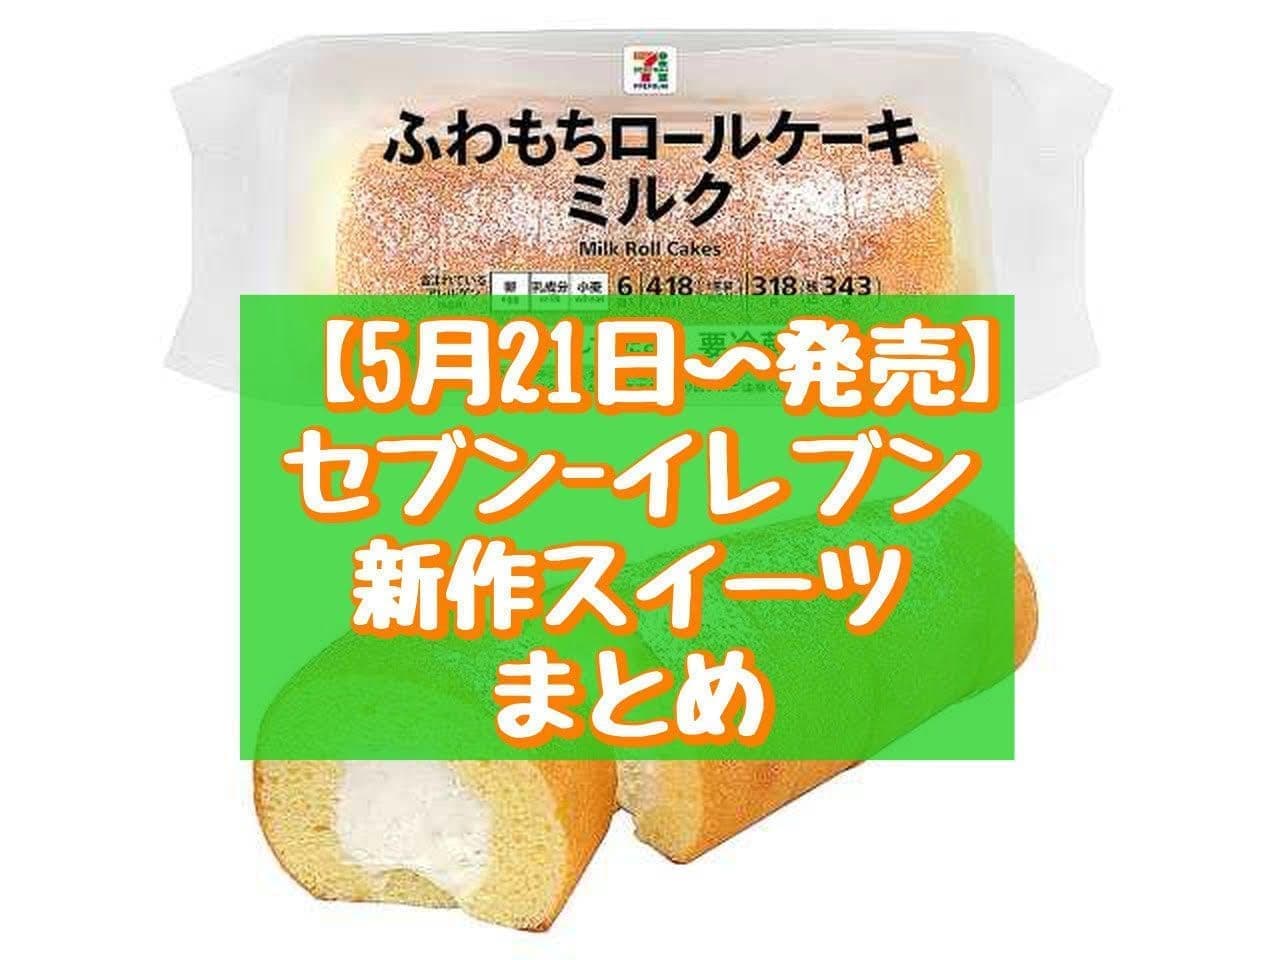 7-ELEVEN New Sweets